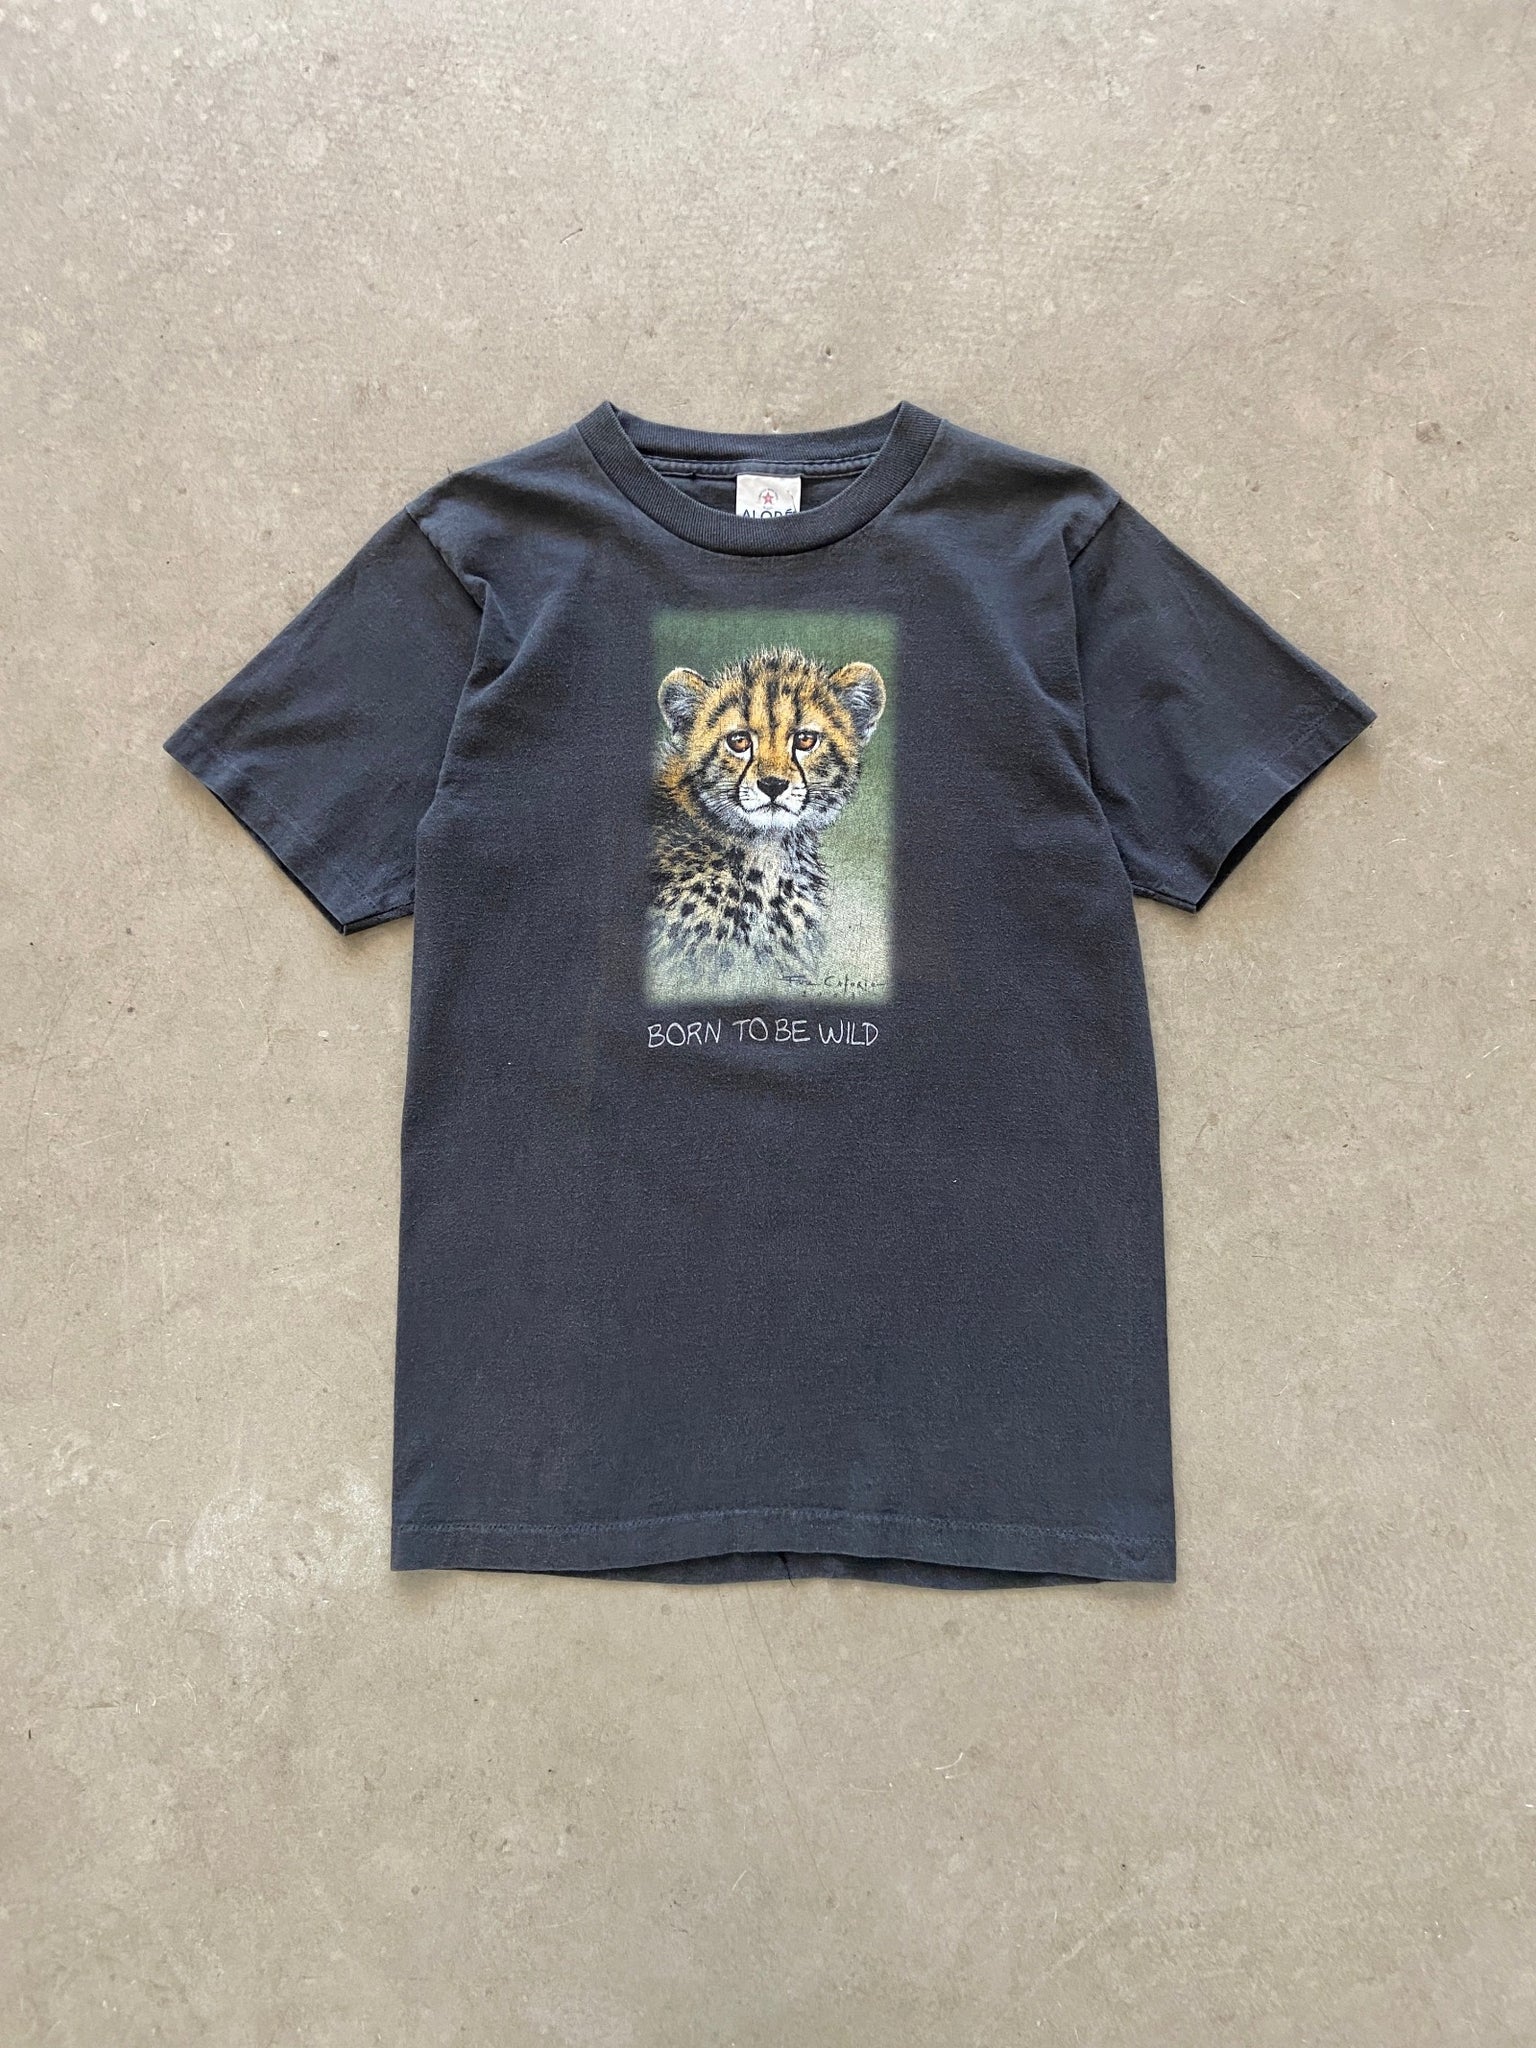 1993 Born To Be Wild T-Shirt - S